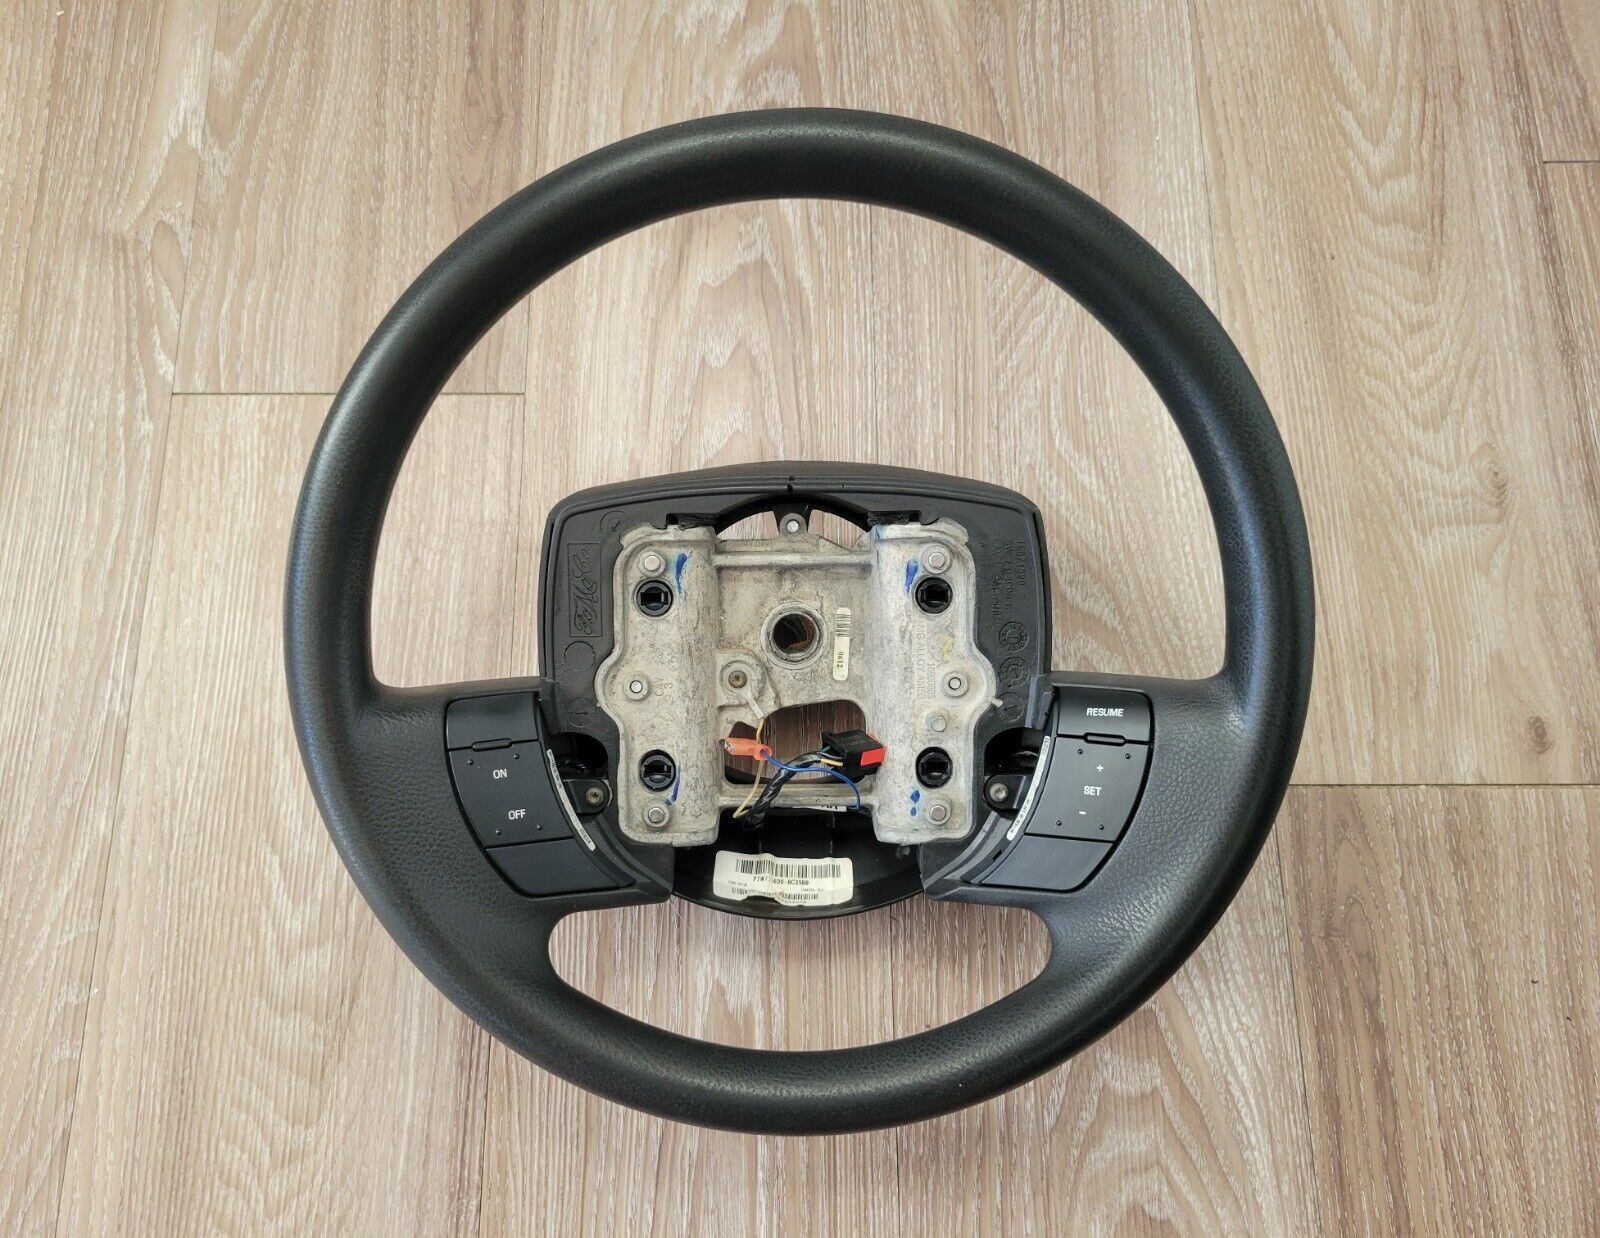 Ford Crown Victoria Steering Wheel with Cruise Control